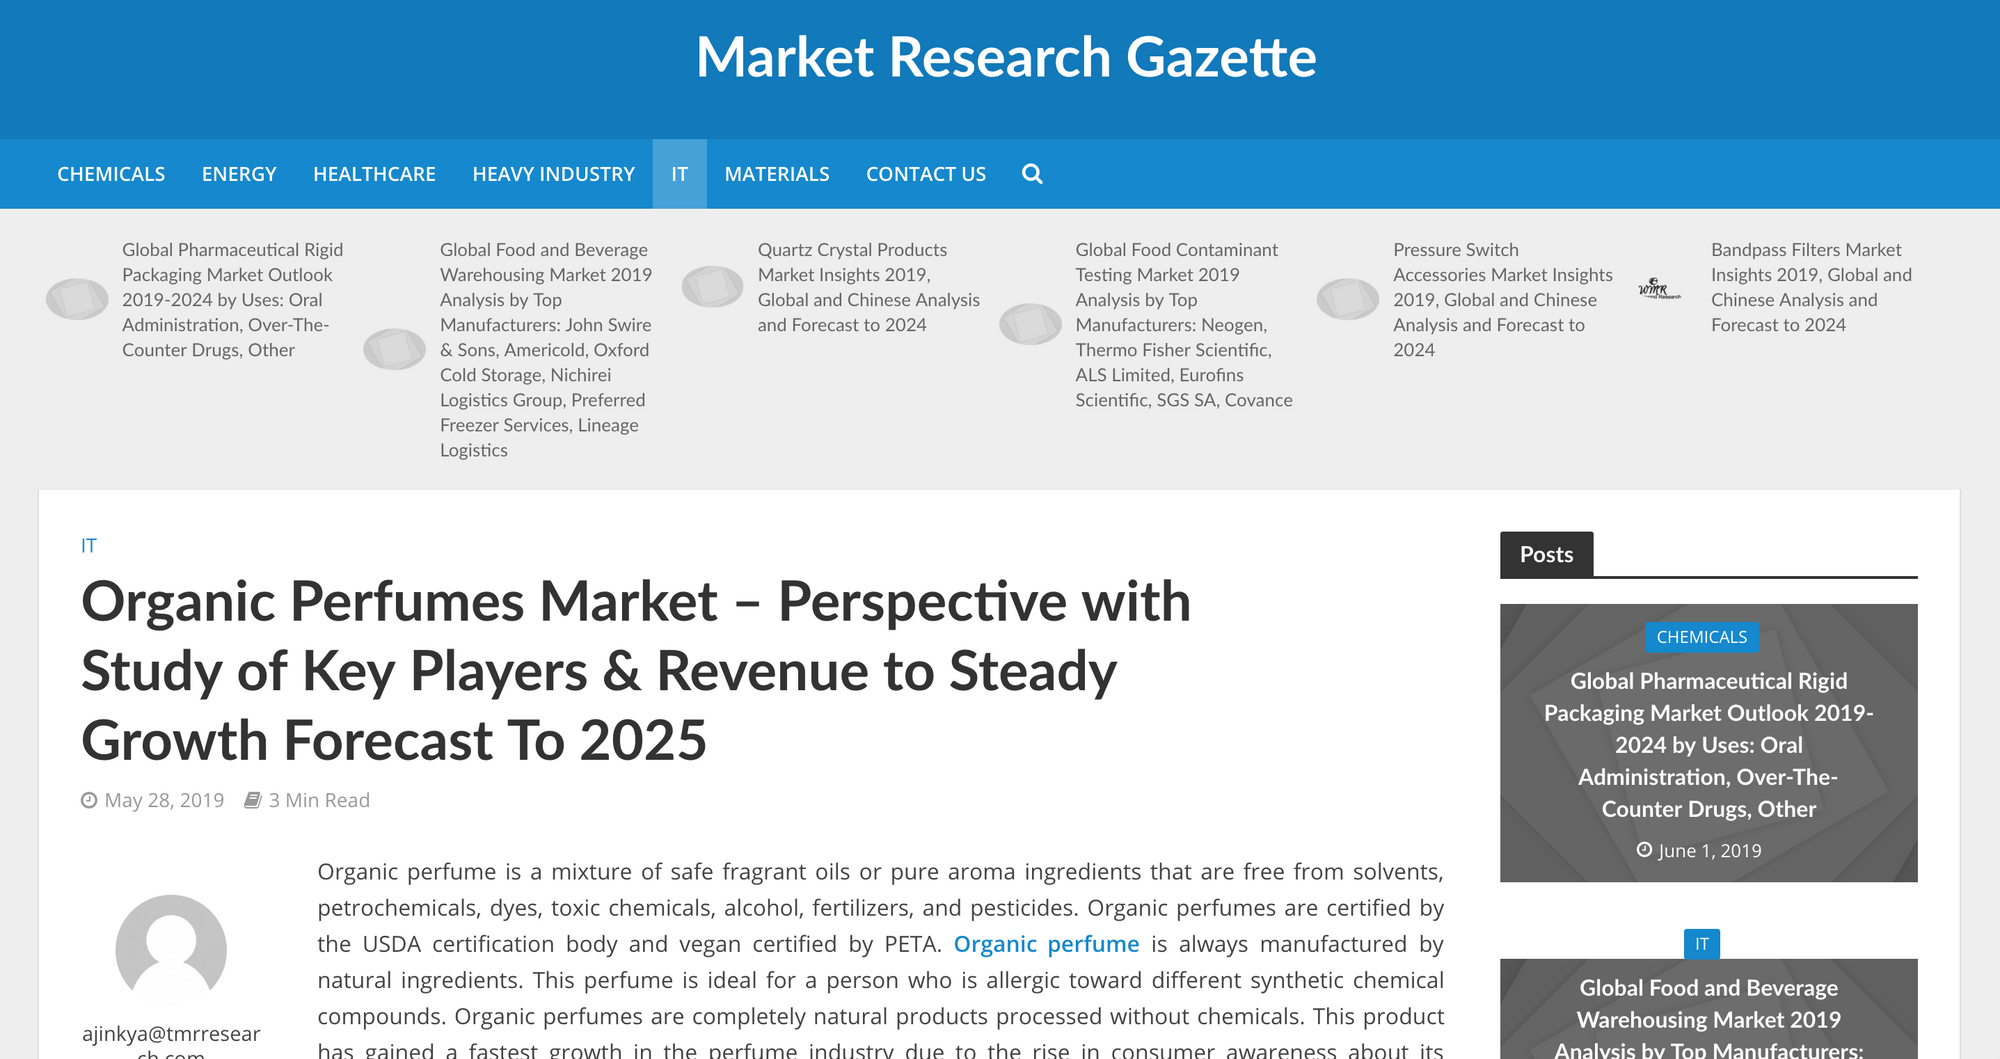 House of Matriarch featured in "Organic Perfumes Market – Perspective with Study of Key Players & Revenue to Steady Growth Forecast To 2025" by Market Research Gazette